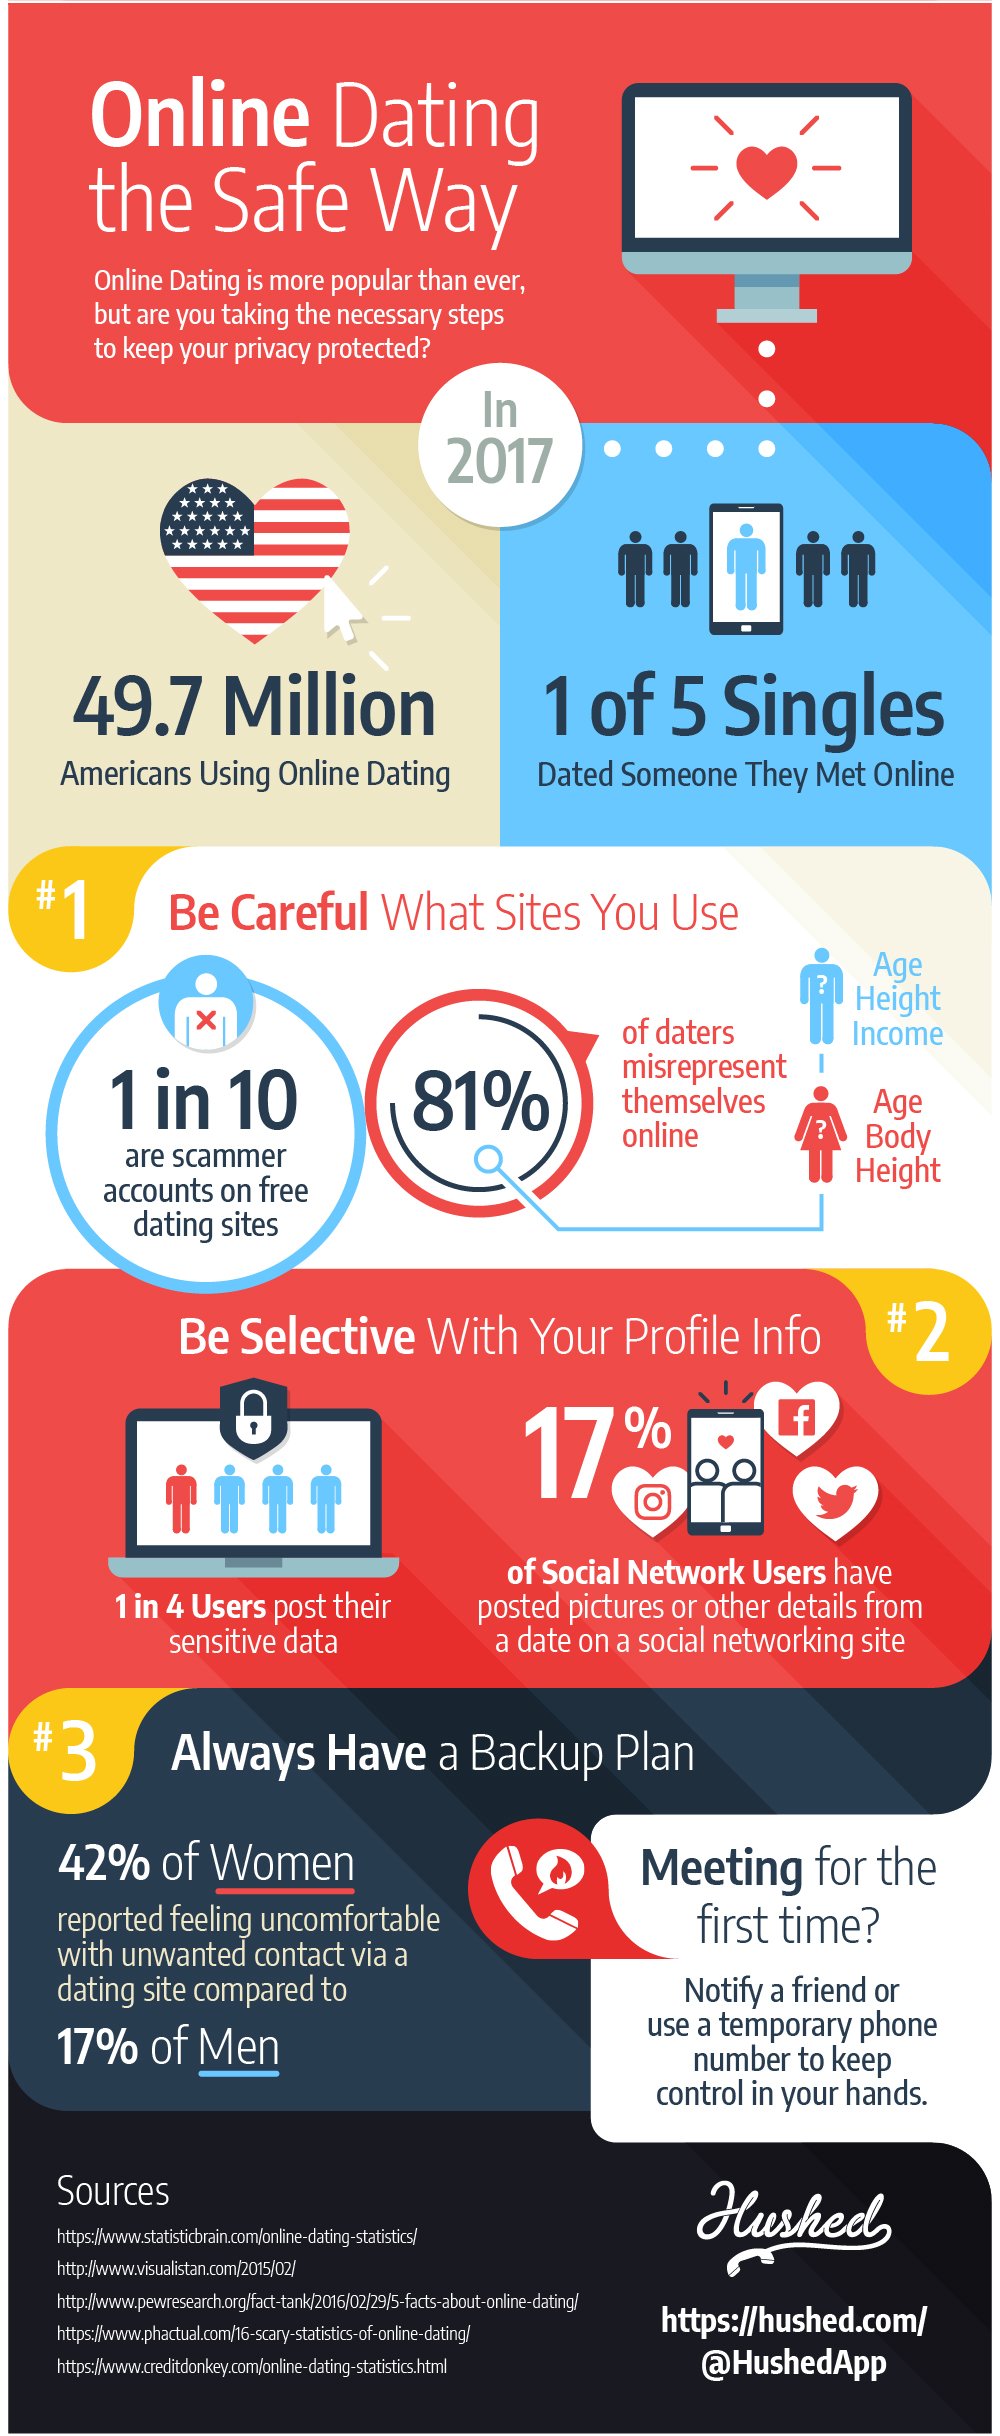 Online Dating Safety